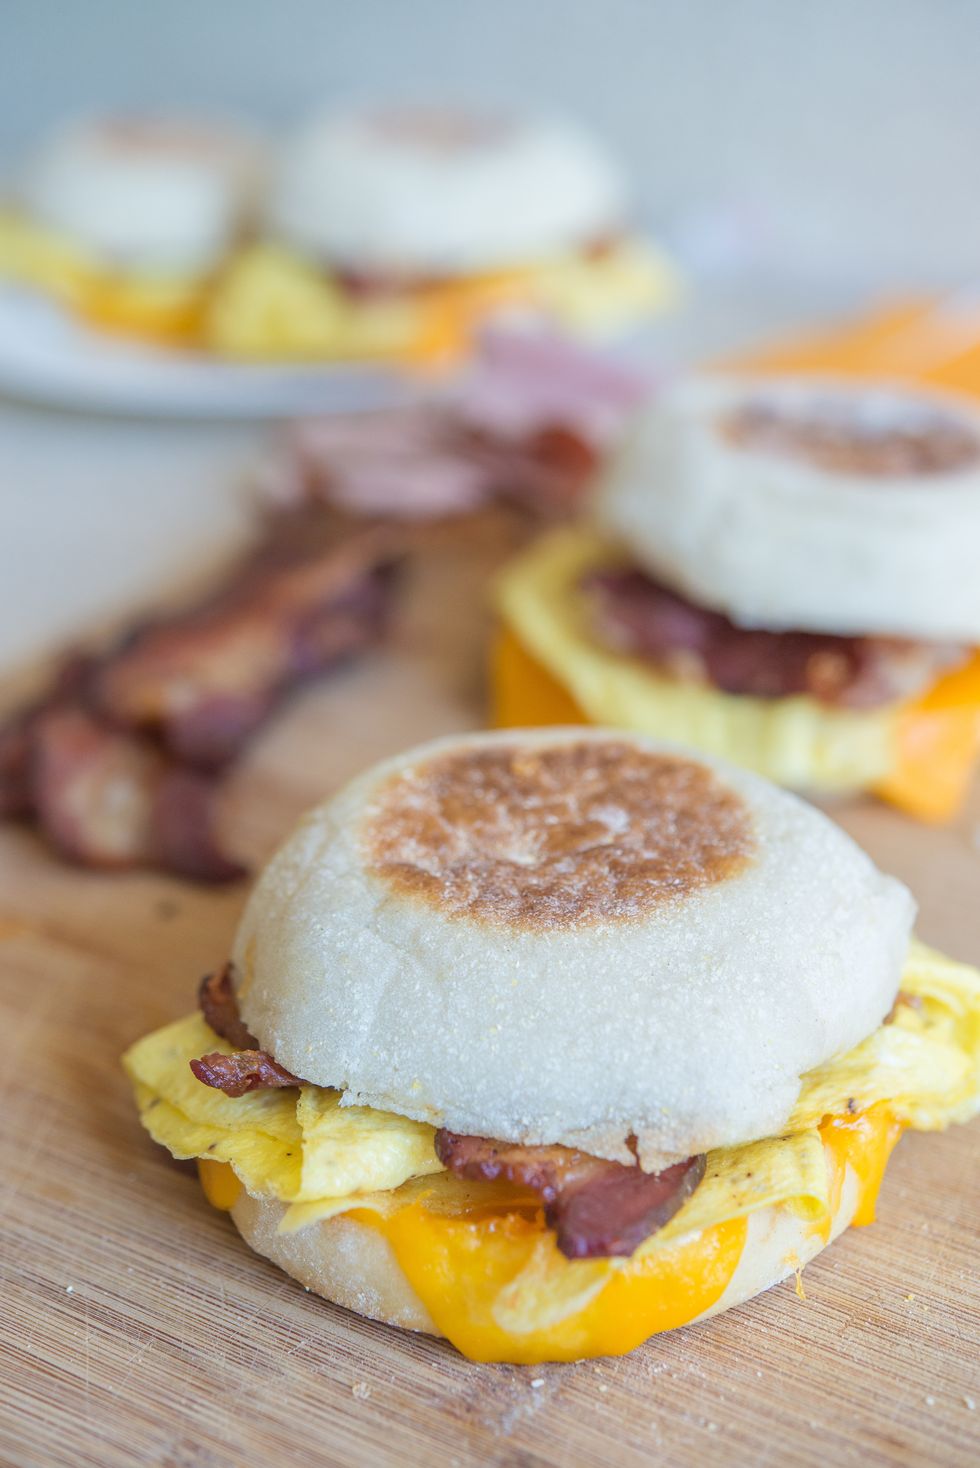 https://hips.hearstapps.com/thepioneerwoman/wp-content/uploads/2015/11/make-ahead-and-freeze-breakfast-sandwiches-15.jpg?resize=980:*